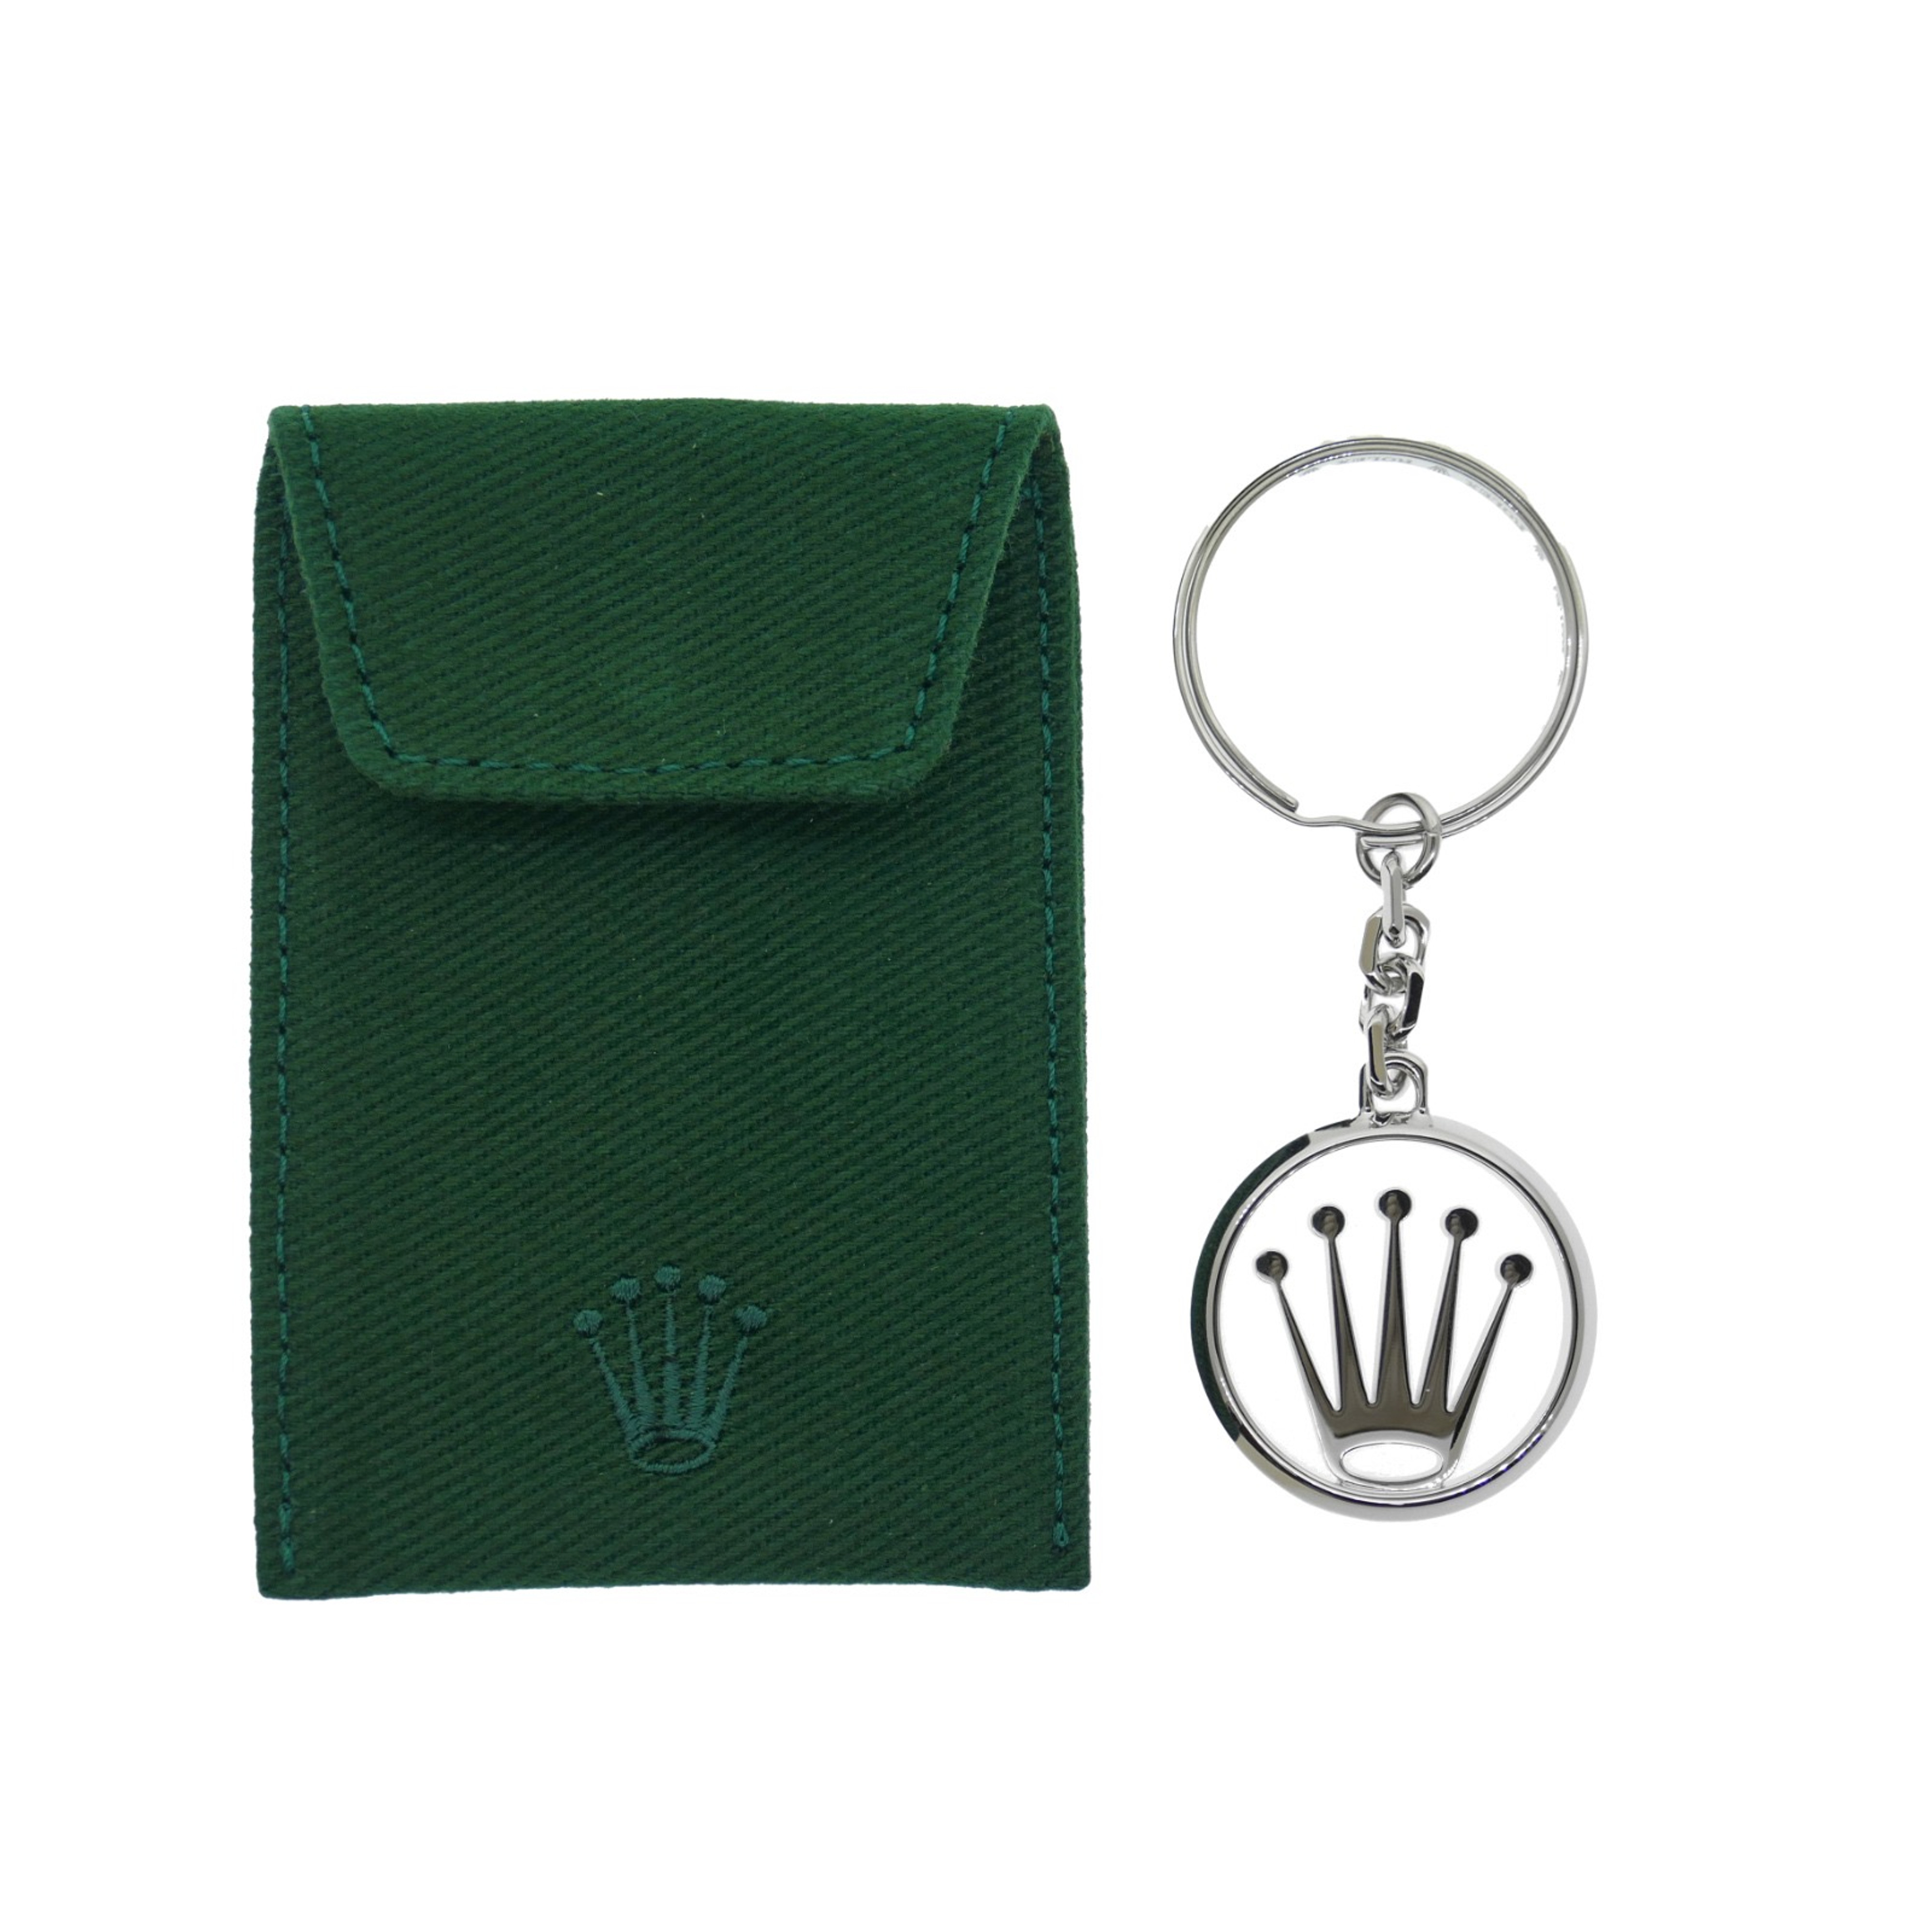 Rolex Silver Key Ring With Pouch - DelrayWatch.com